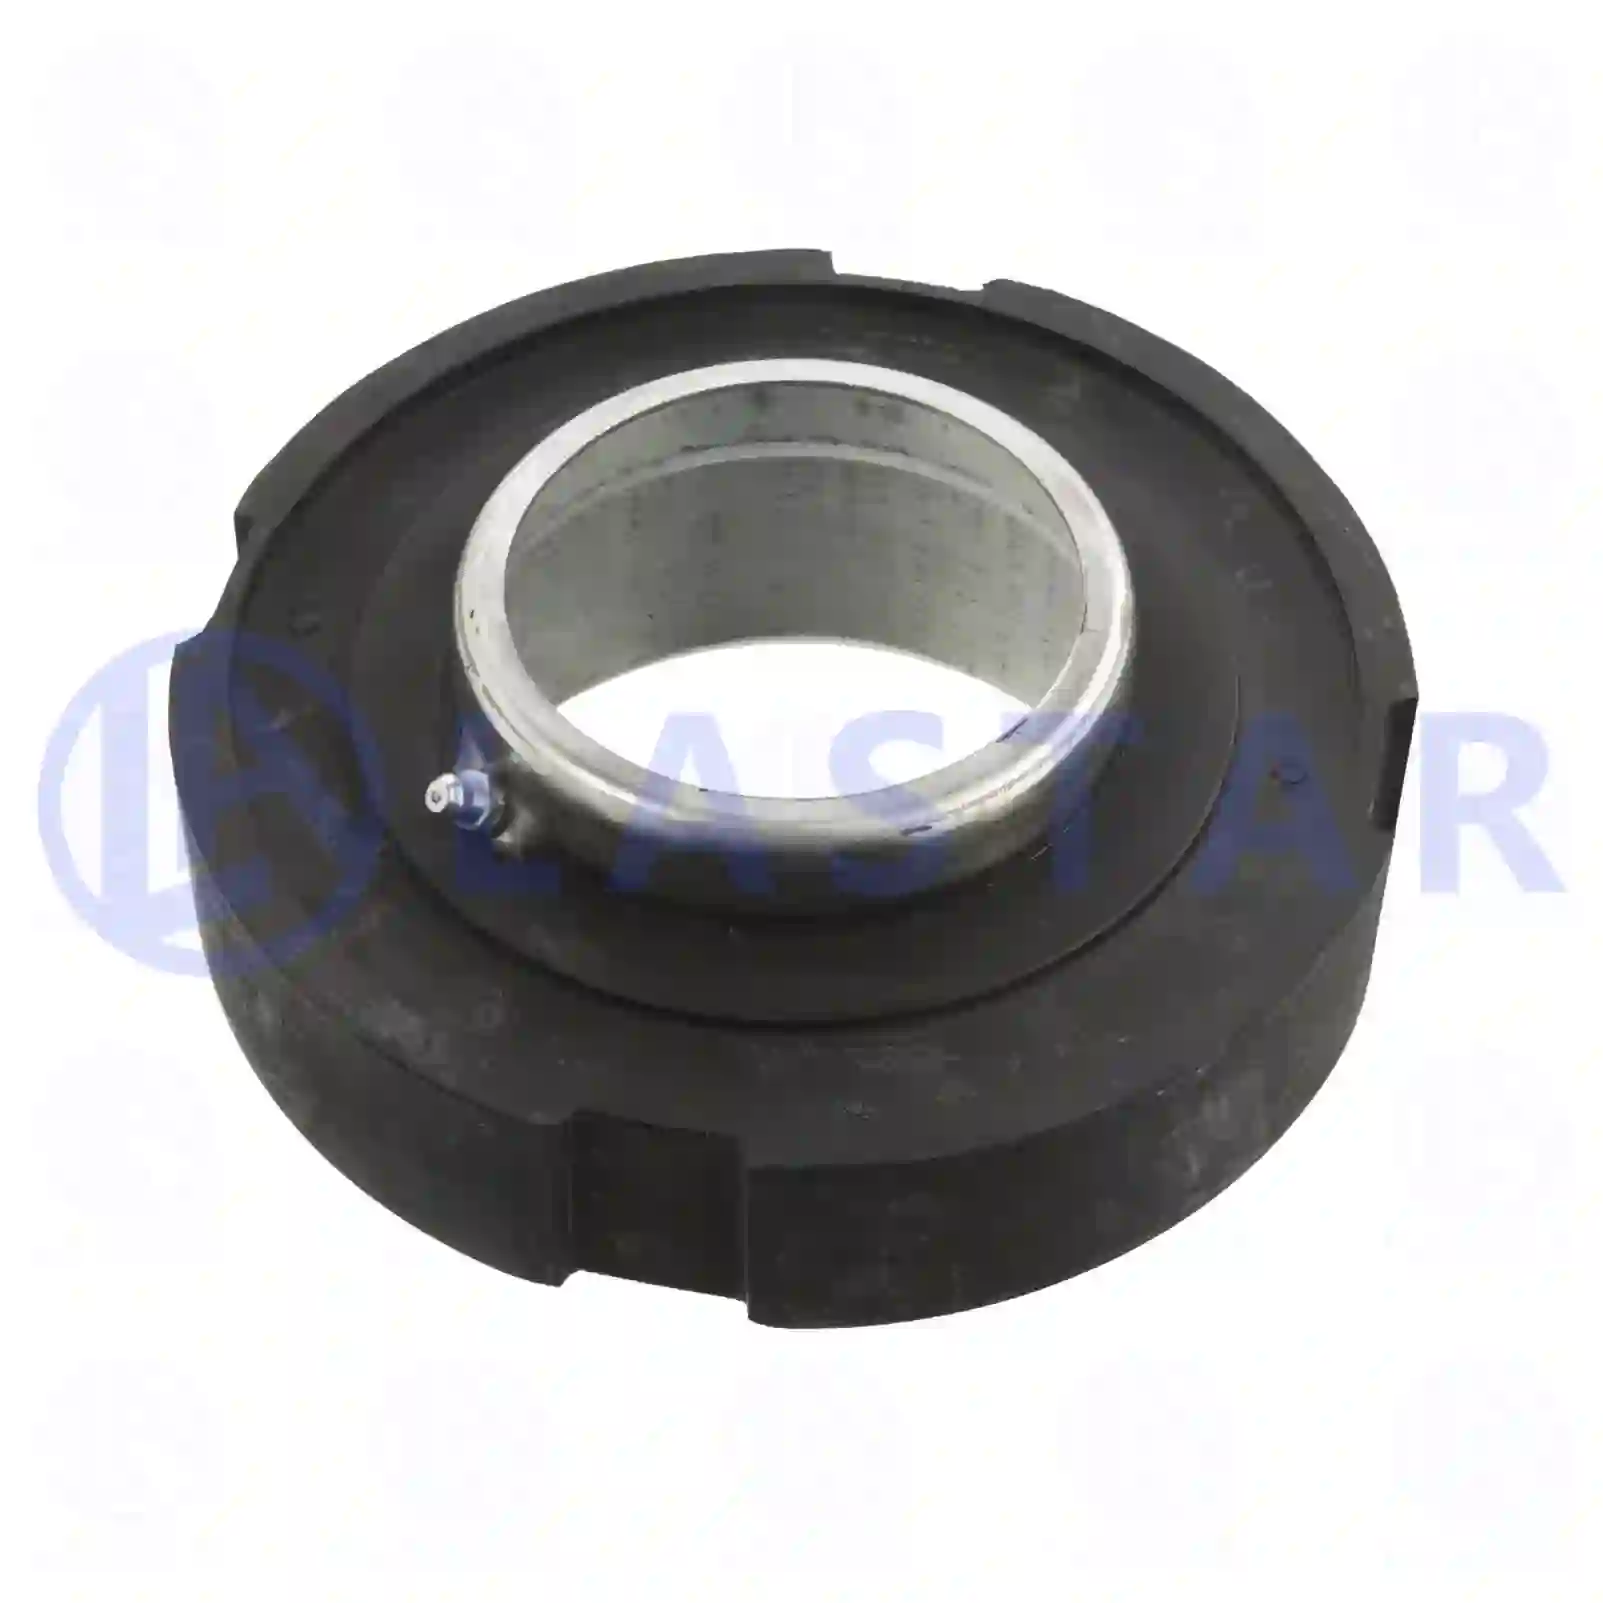 Center bearing, 77734426, 1113033, 294271 ||  77734426 Lastar Spare Part | Truck Spare Parts, Auotomotive Spare Parts Center bearing, 77734426, 1113033, 294271 ||  77734426 Lastar Spare Part | Truck Spare Parts, Auotomotive Spare Parts